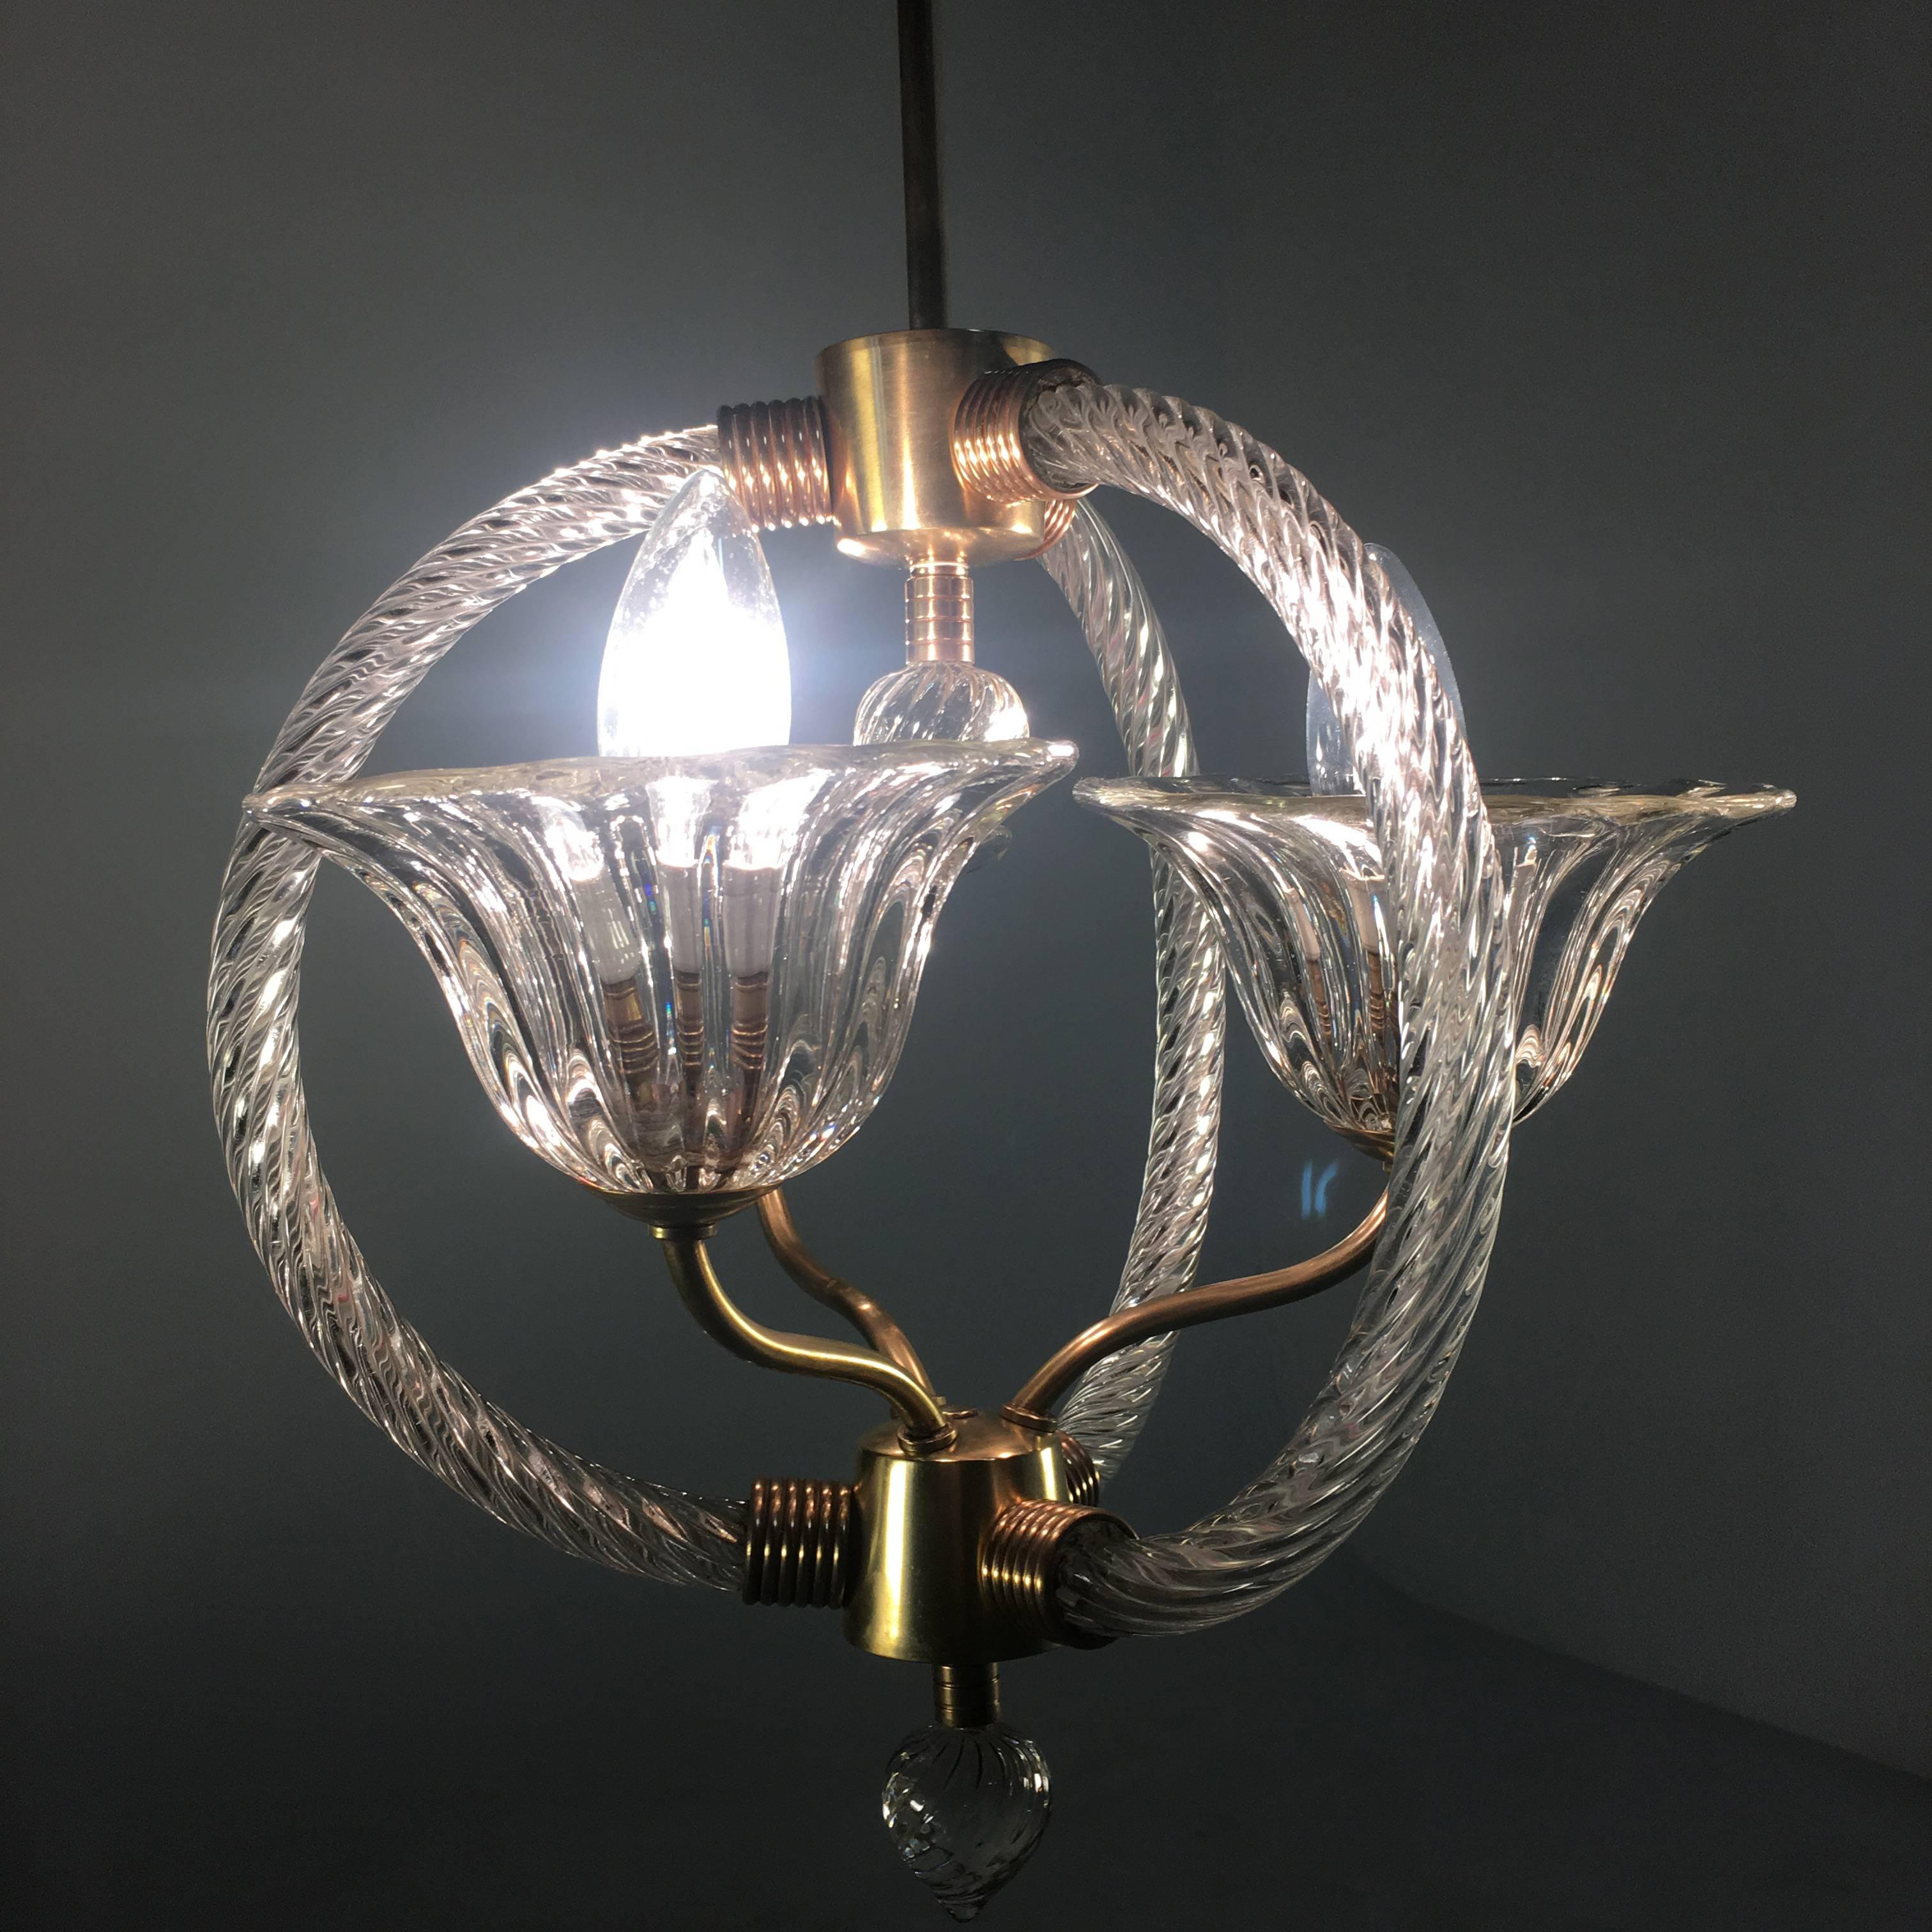 20th Century Charming Italian Chandelier by Barovier & Toso, Murano, 1940 For Sale